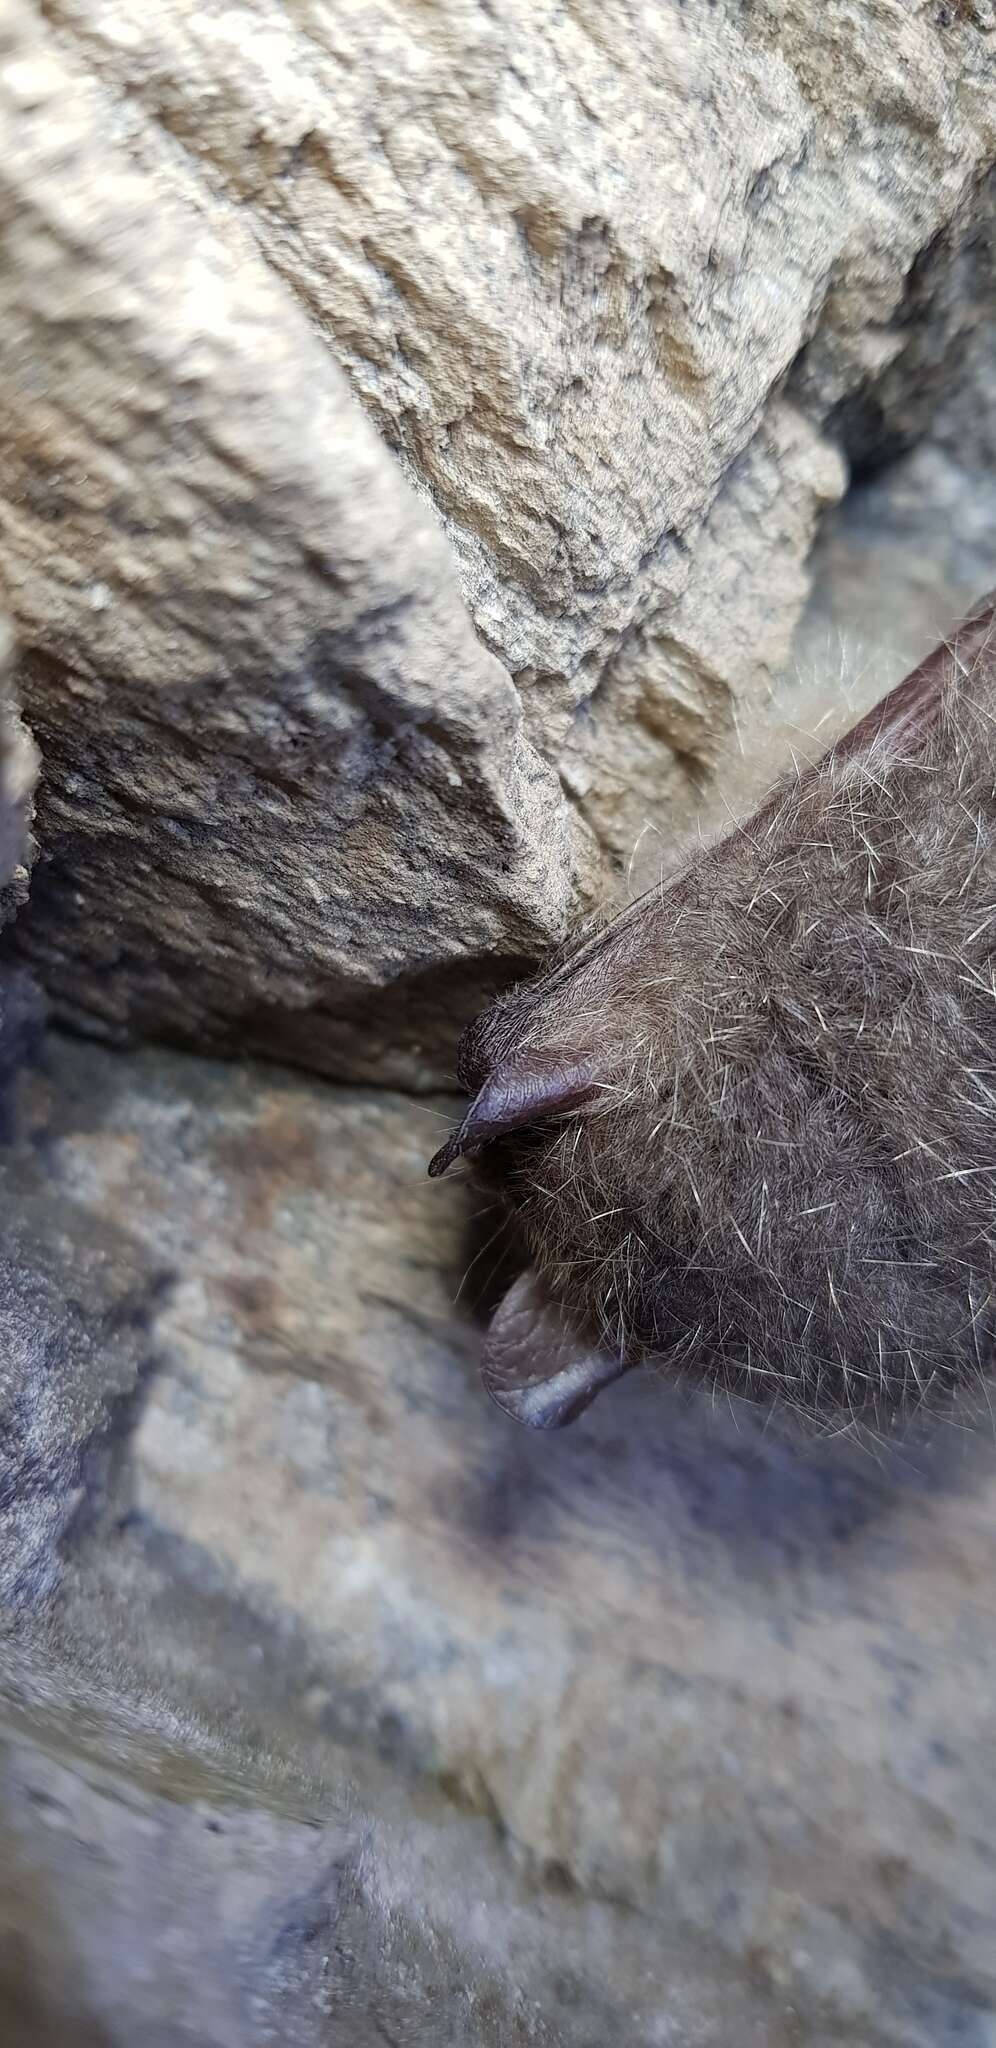 Image of Greater Tube-nosed Bat